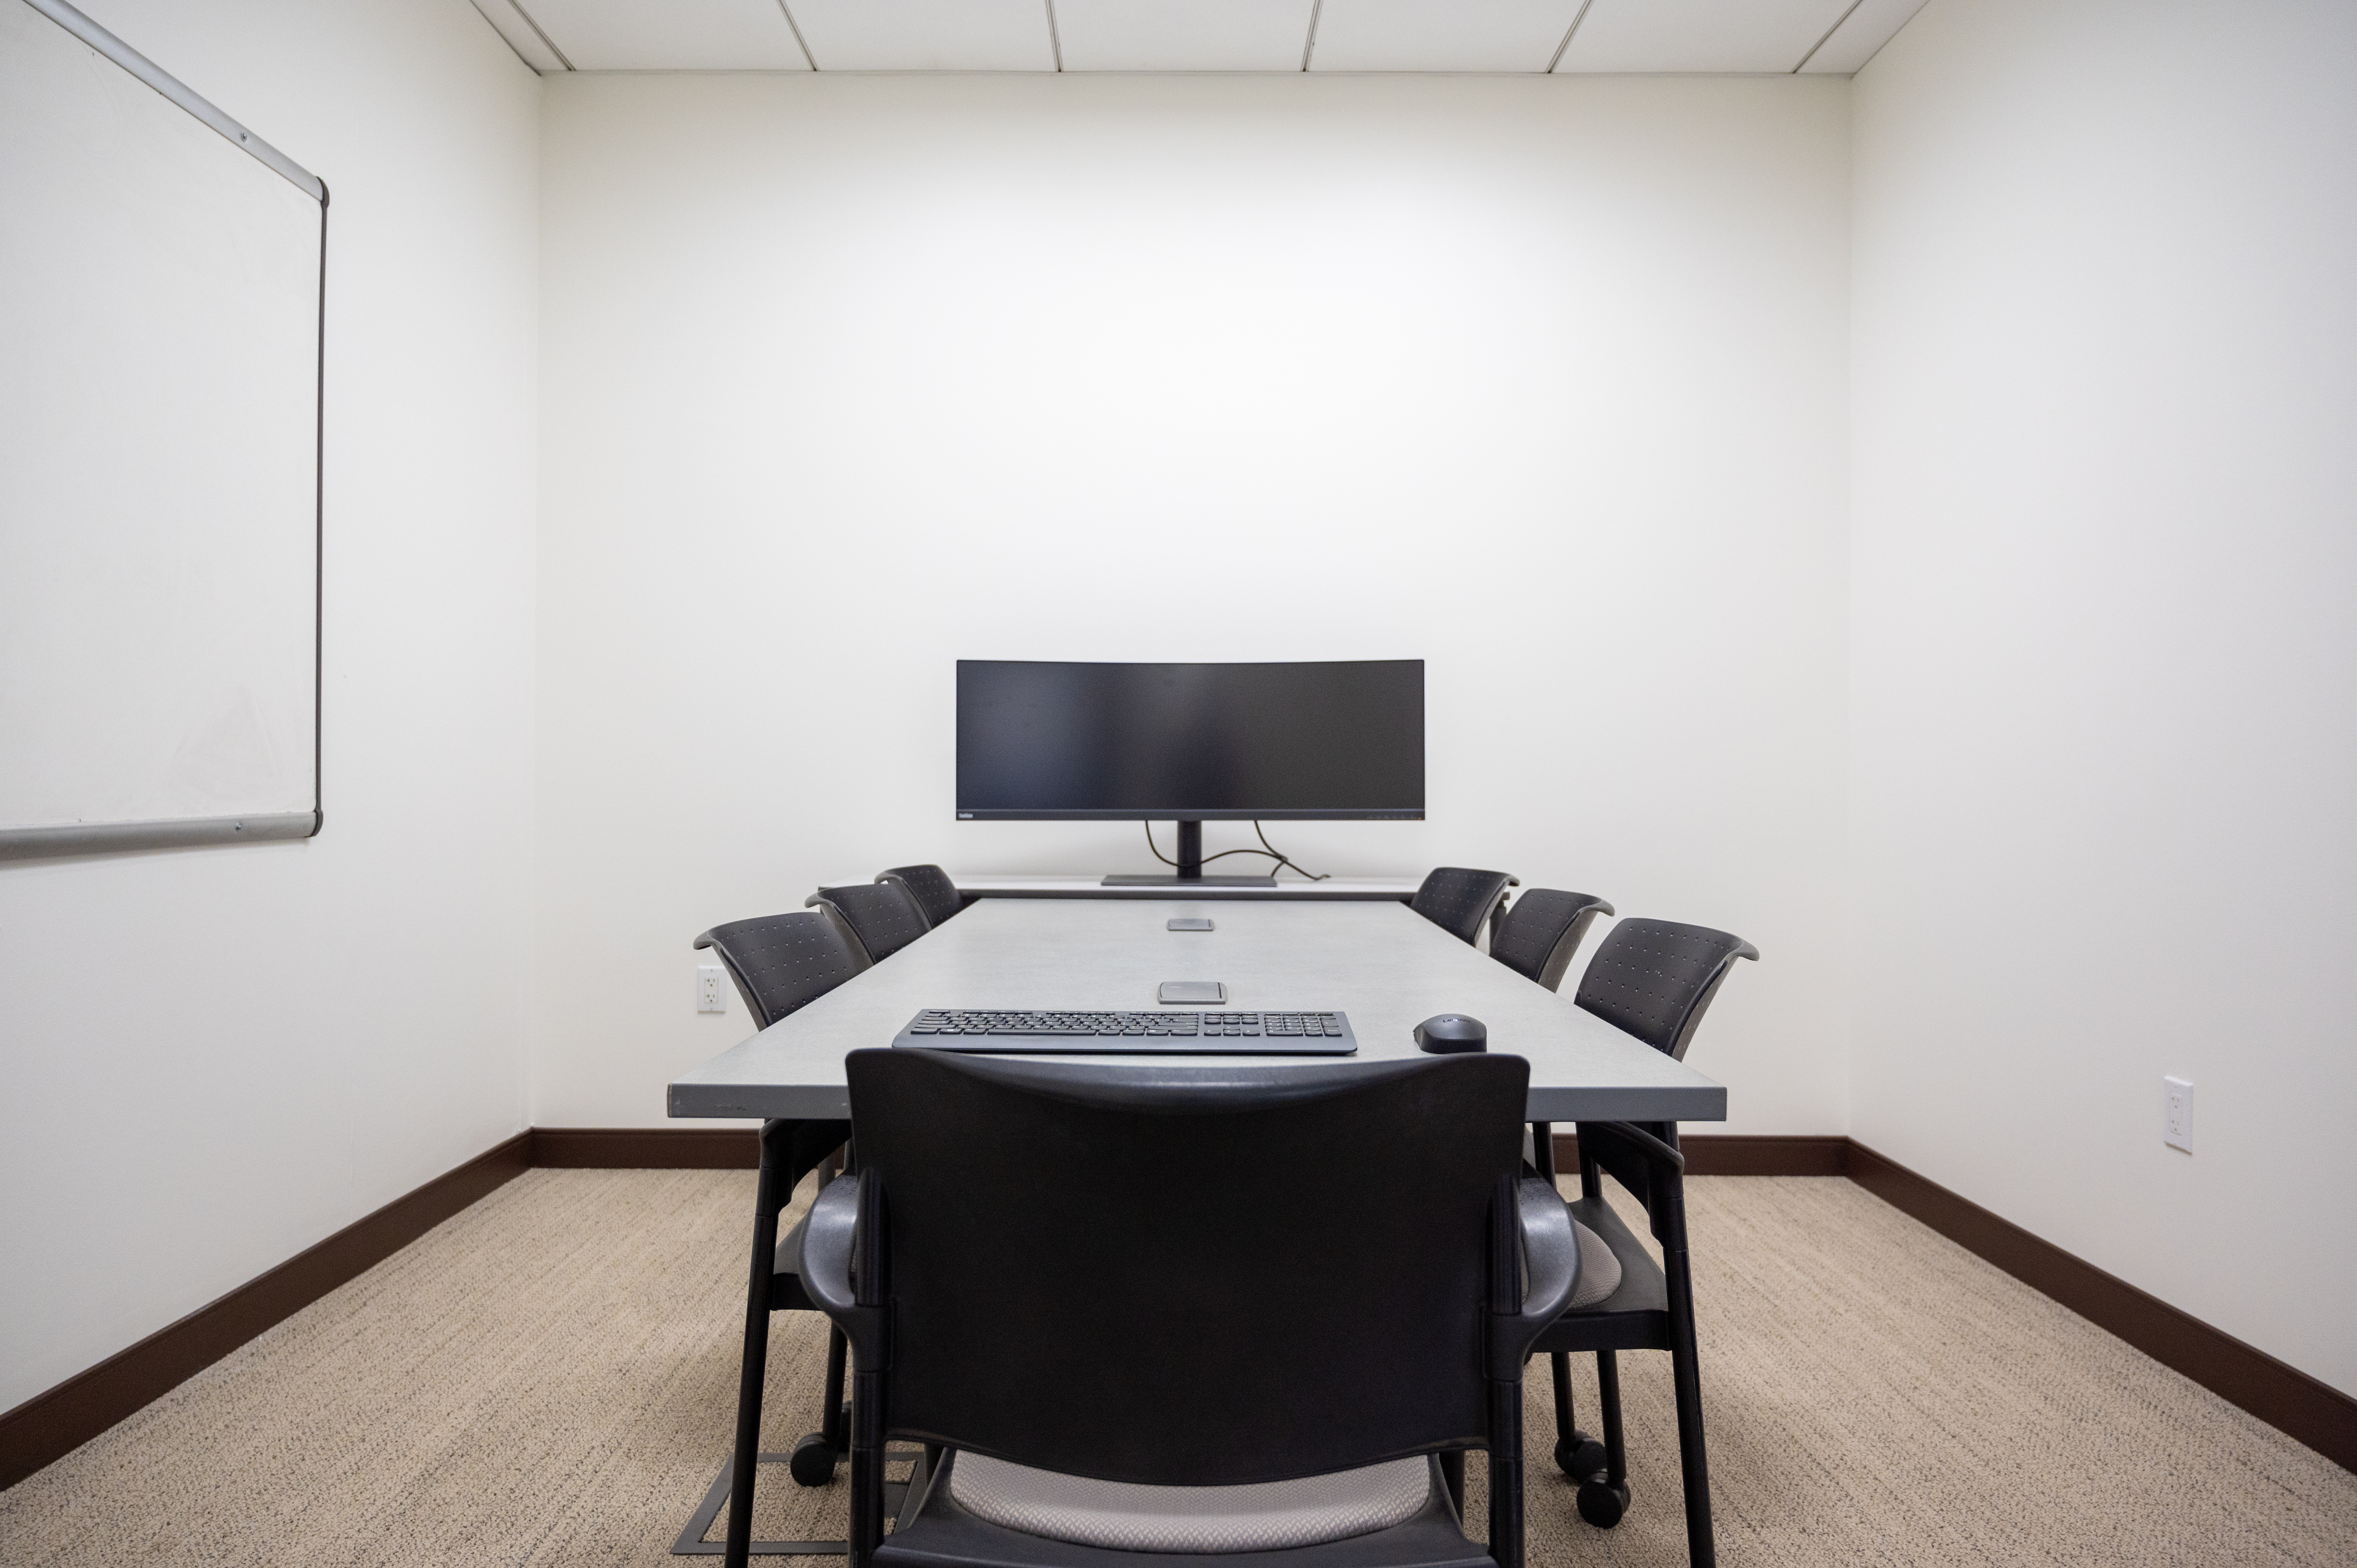 The Sequoia Room, which includes a meeting table that seats 7 people, a large computer monitor, and whiteboard.